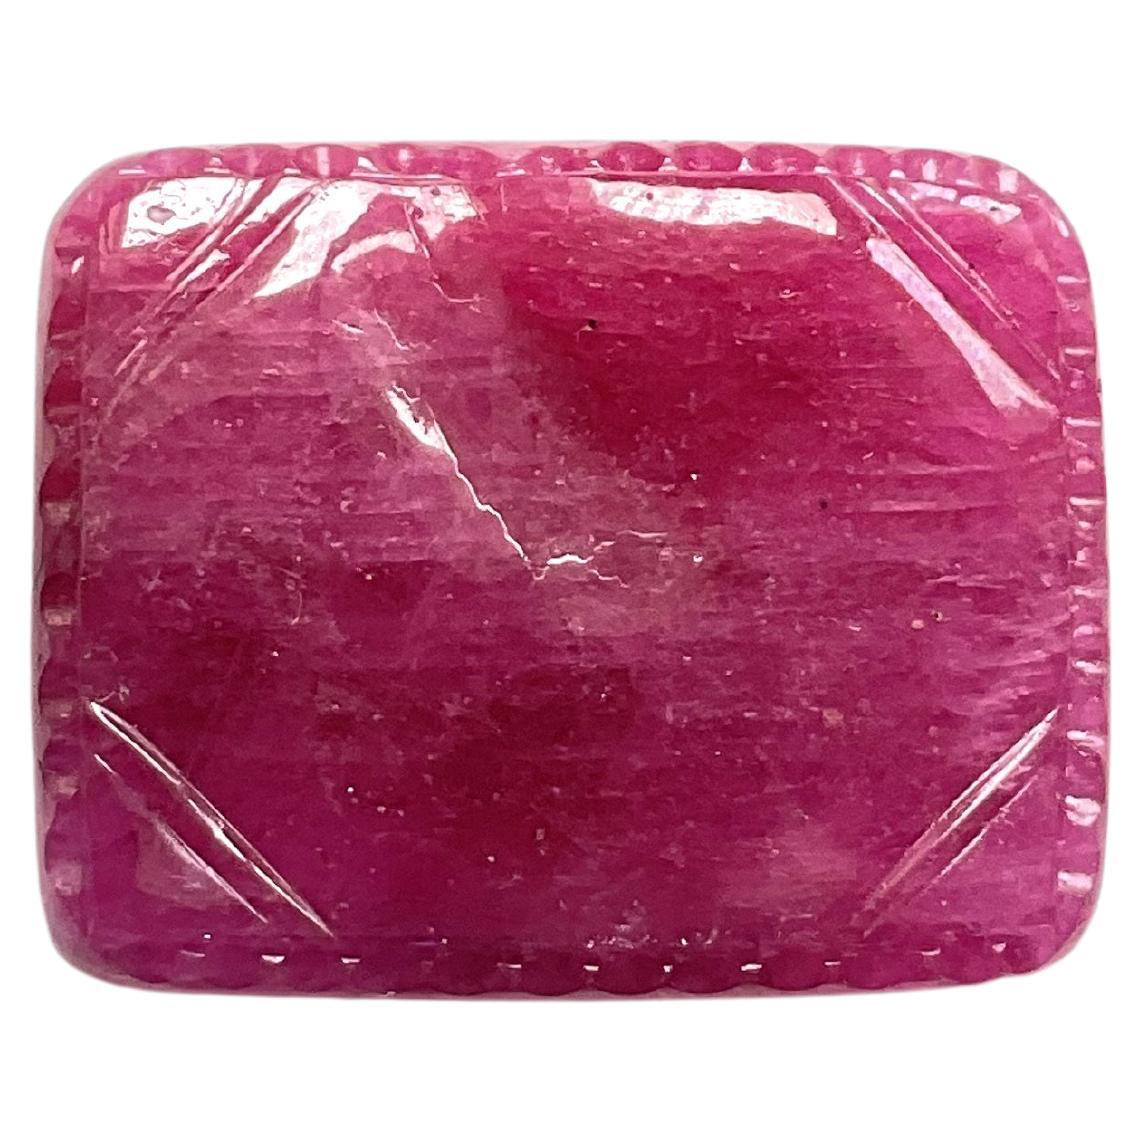 Certified 89.35 Carats Ruby Mozambique Carved Specimen Heated Natural Gemstone For Sale